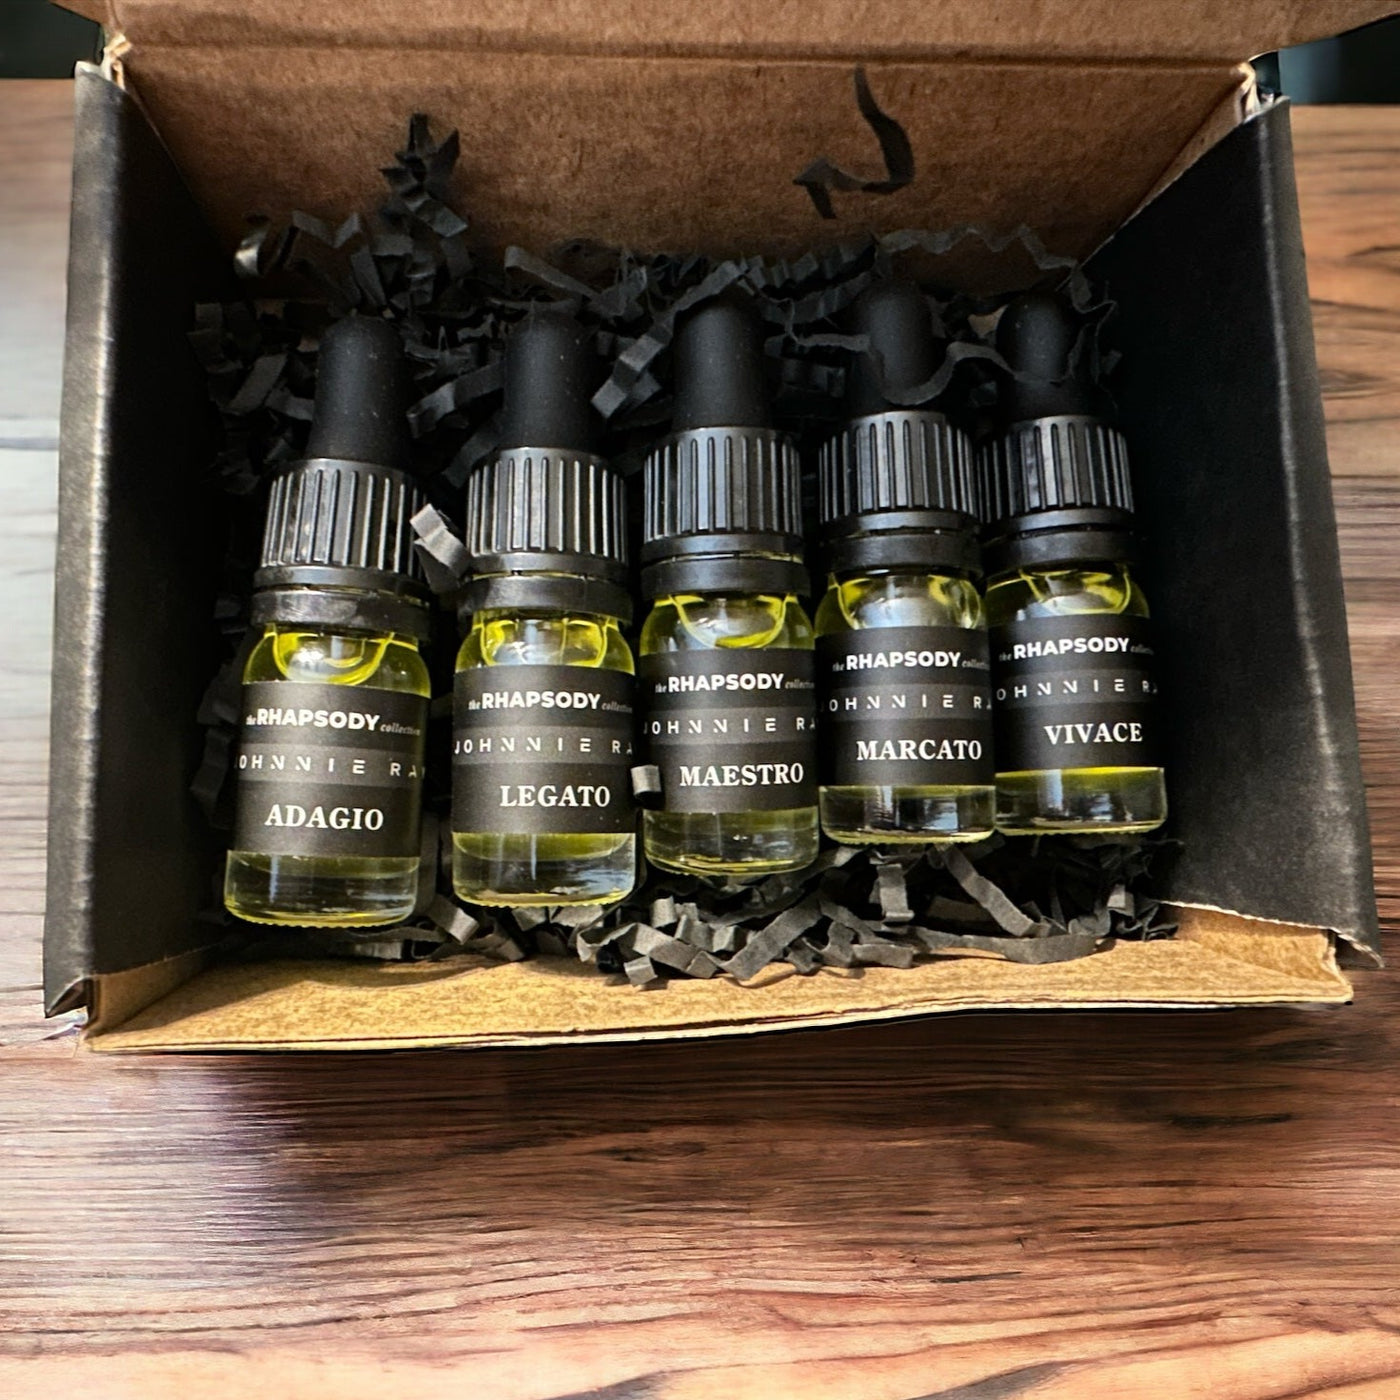 Black box with 5mL bottles of The Rhapsody Collection Signature Blend Beard Oil from Johnnie Ray sitting on a wooden table